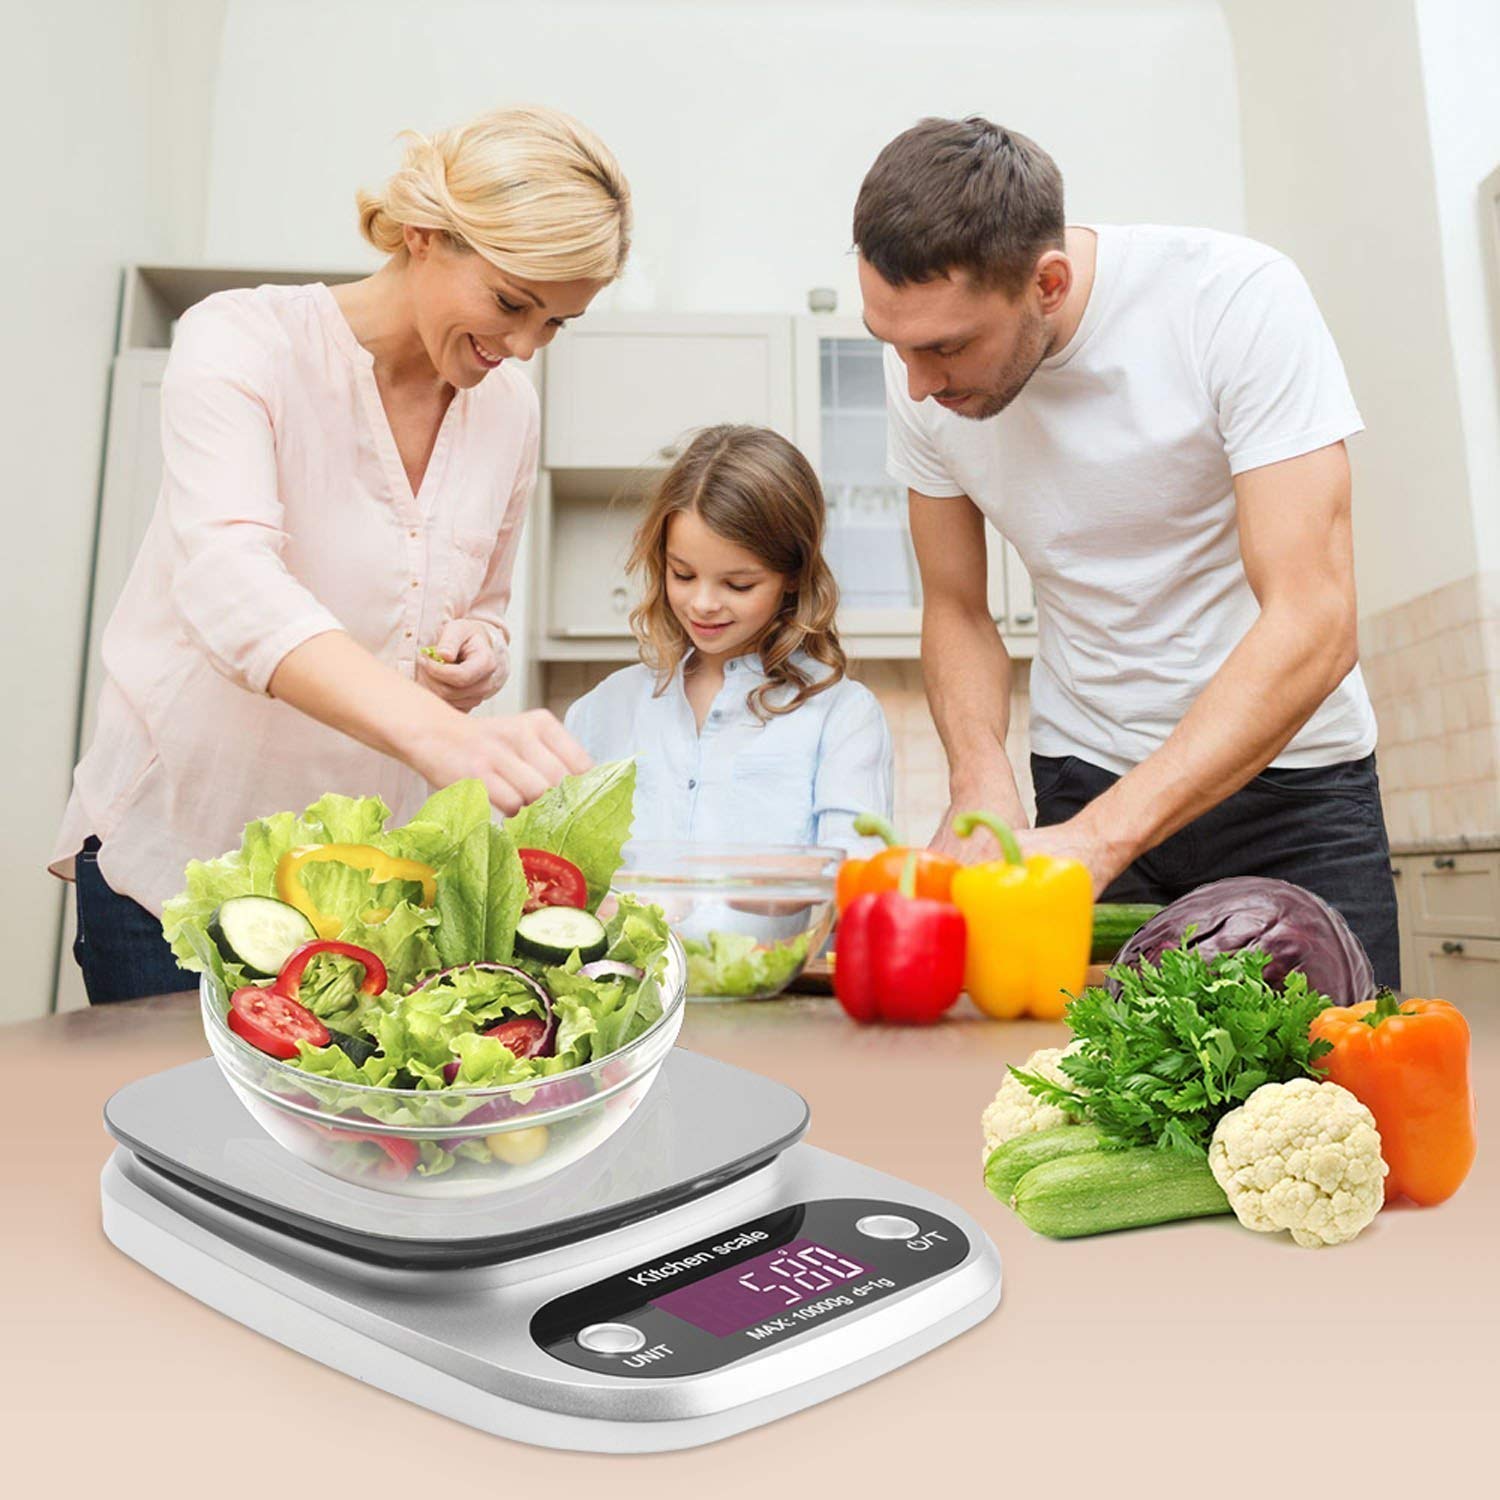 Digital Kitchen Scale, 22lb/10kg Multifunction Weight Scale Electronic Baking & Cooking Scale with LCD Display